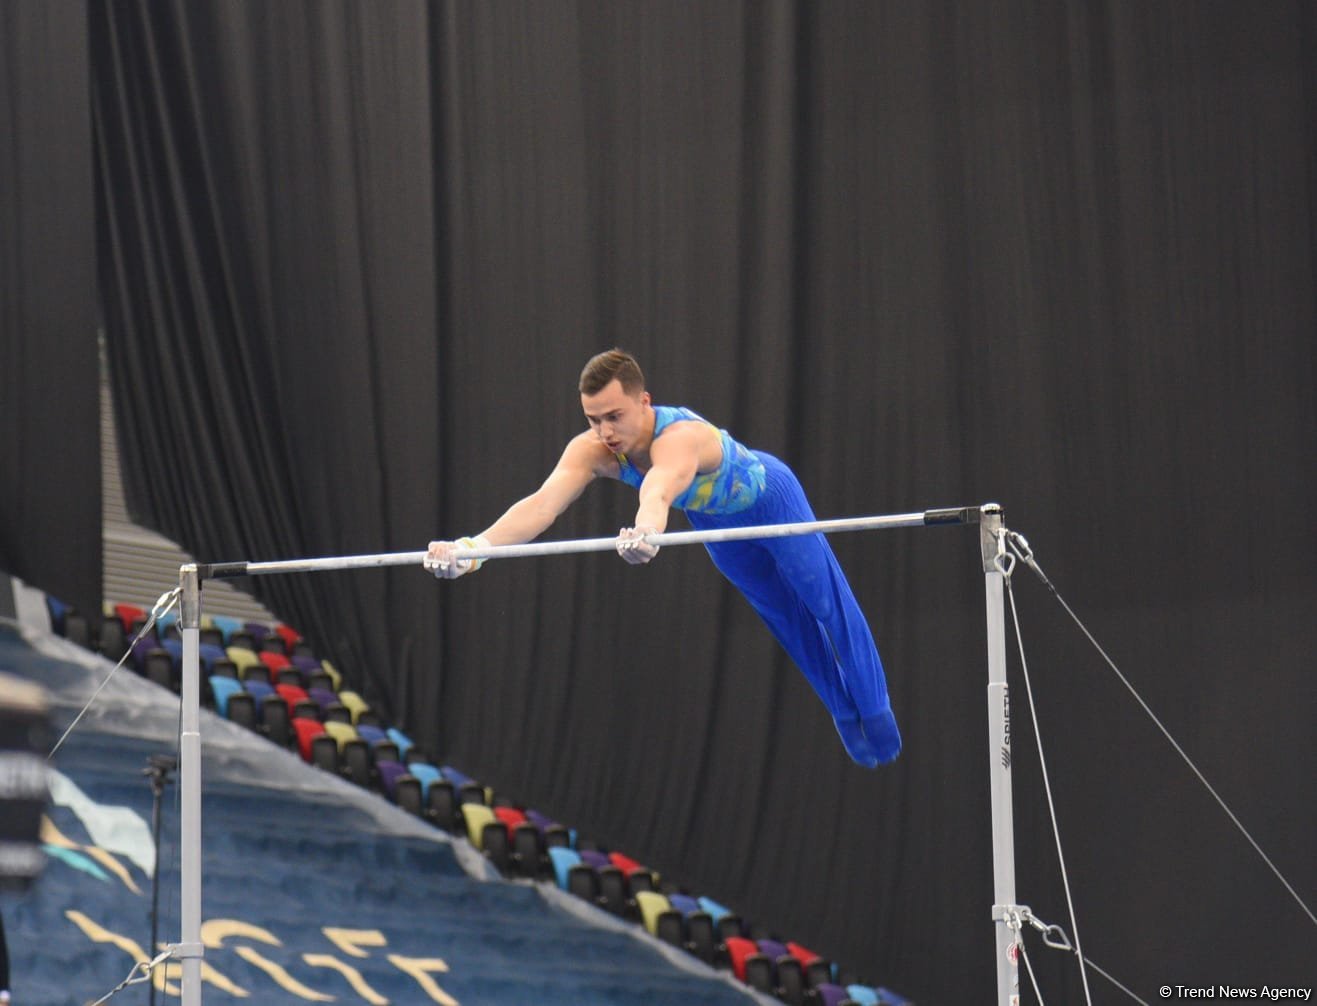 Azerbaijan hosts second day of FIG Artistic Gymnastics World Cup competitions (PHOTO)